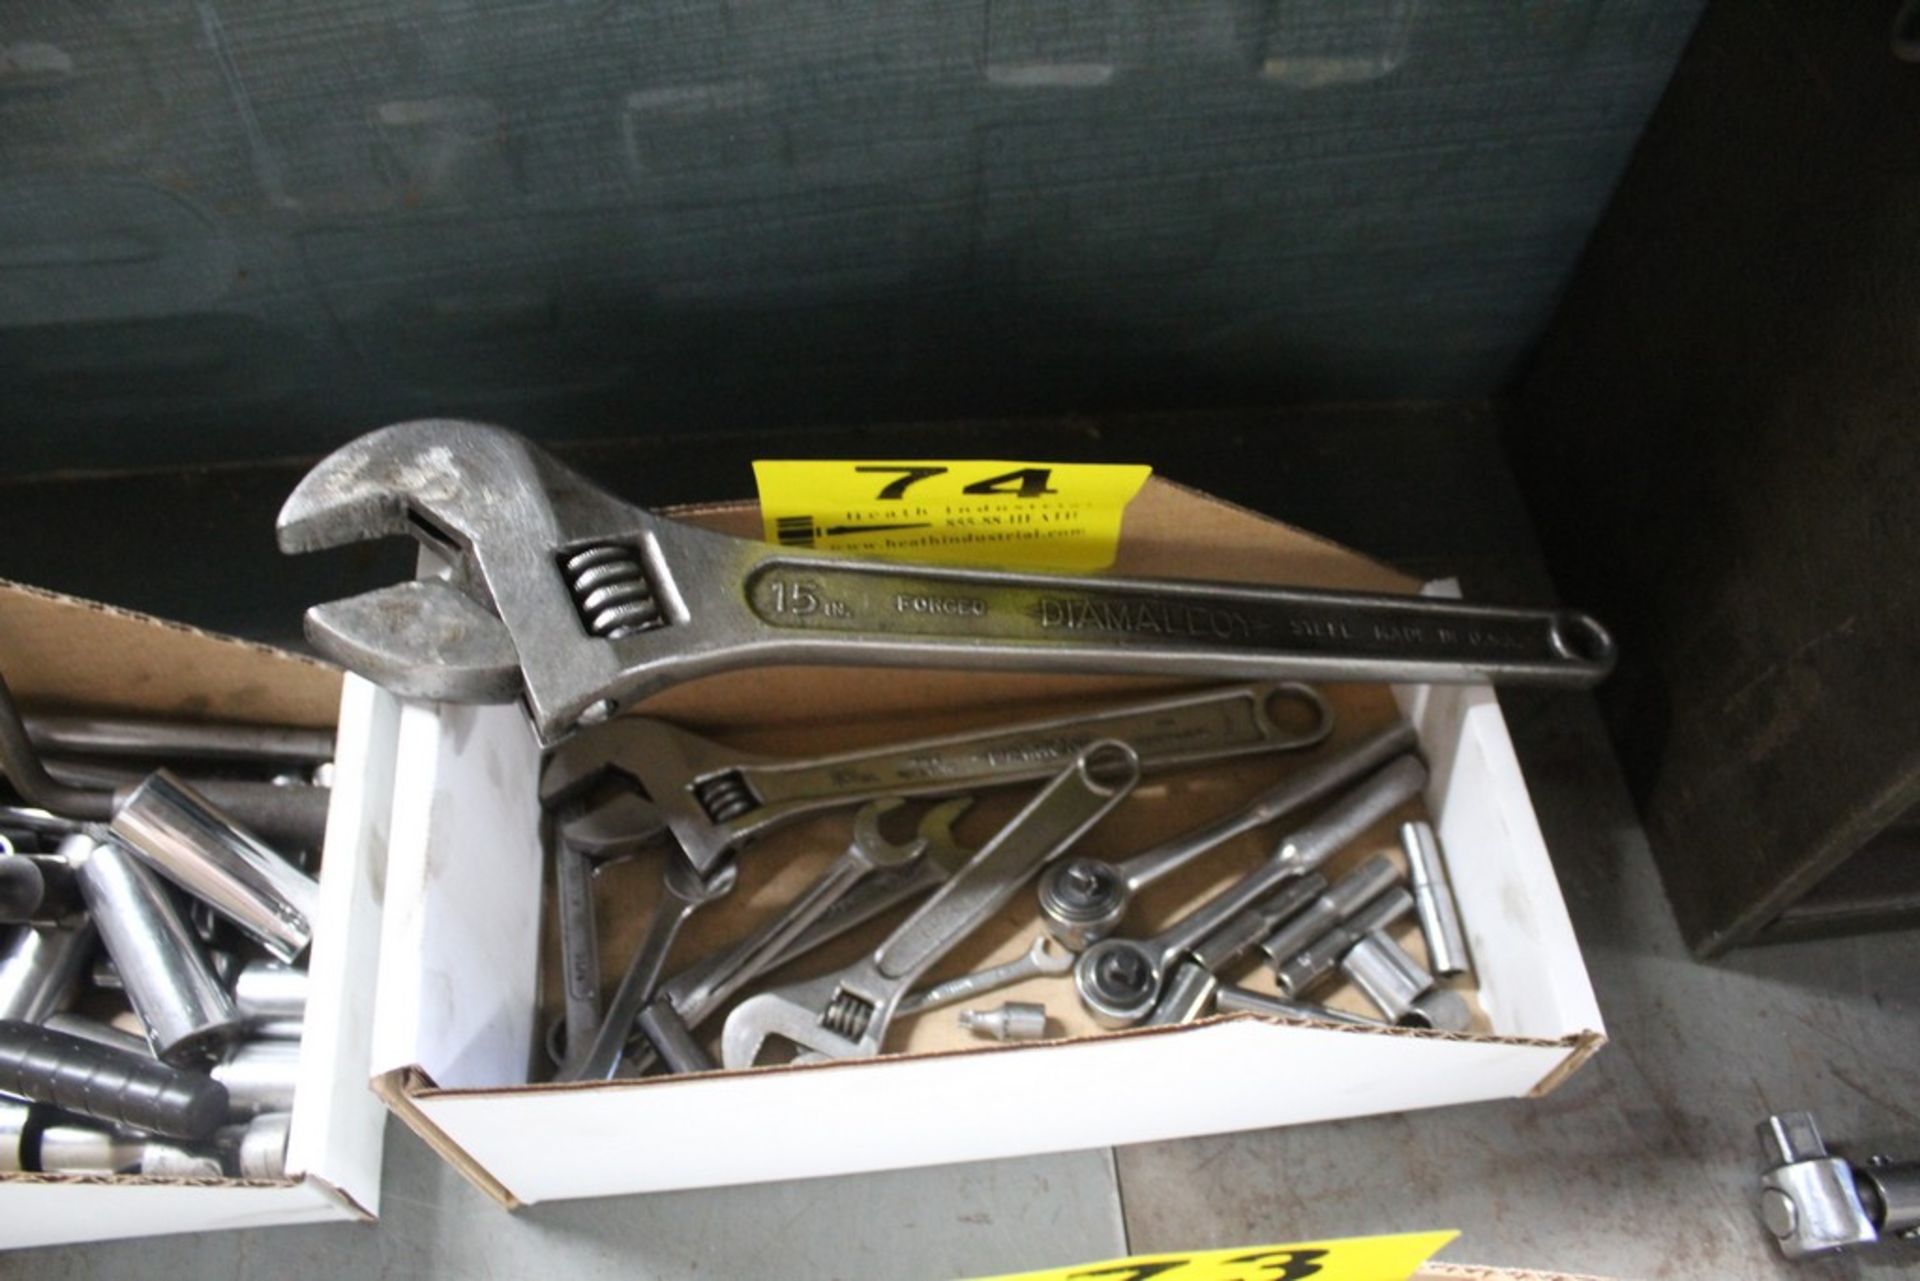 15" CRESCENT WRENCH, 1/4" DRIVE RACHET AND SOCKETS, SMALL WRENCHES